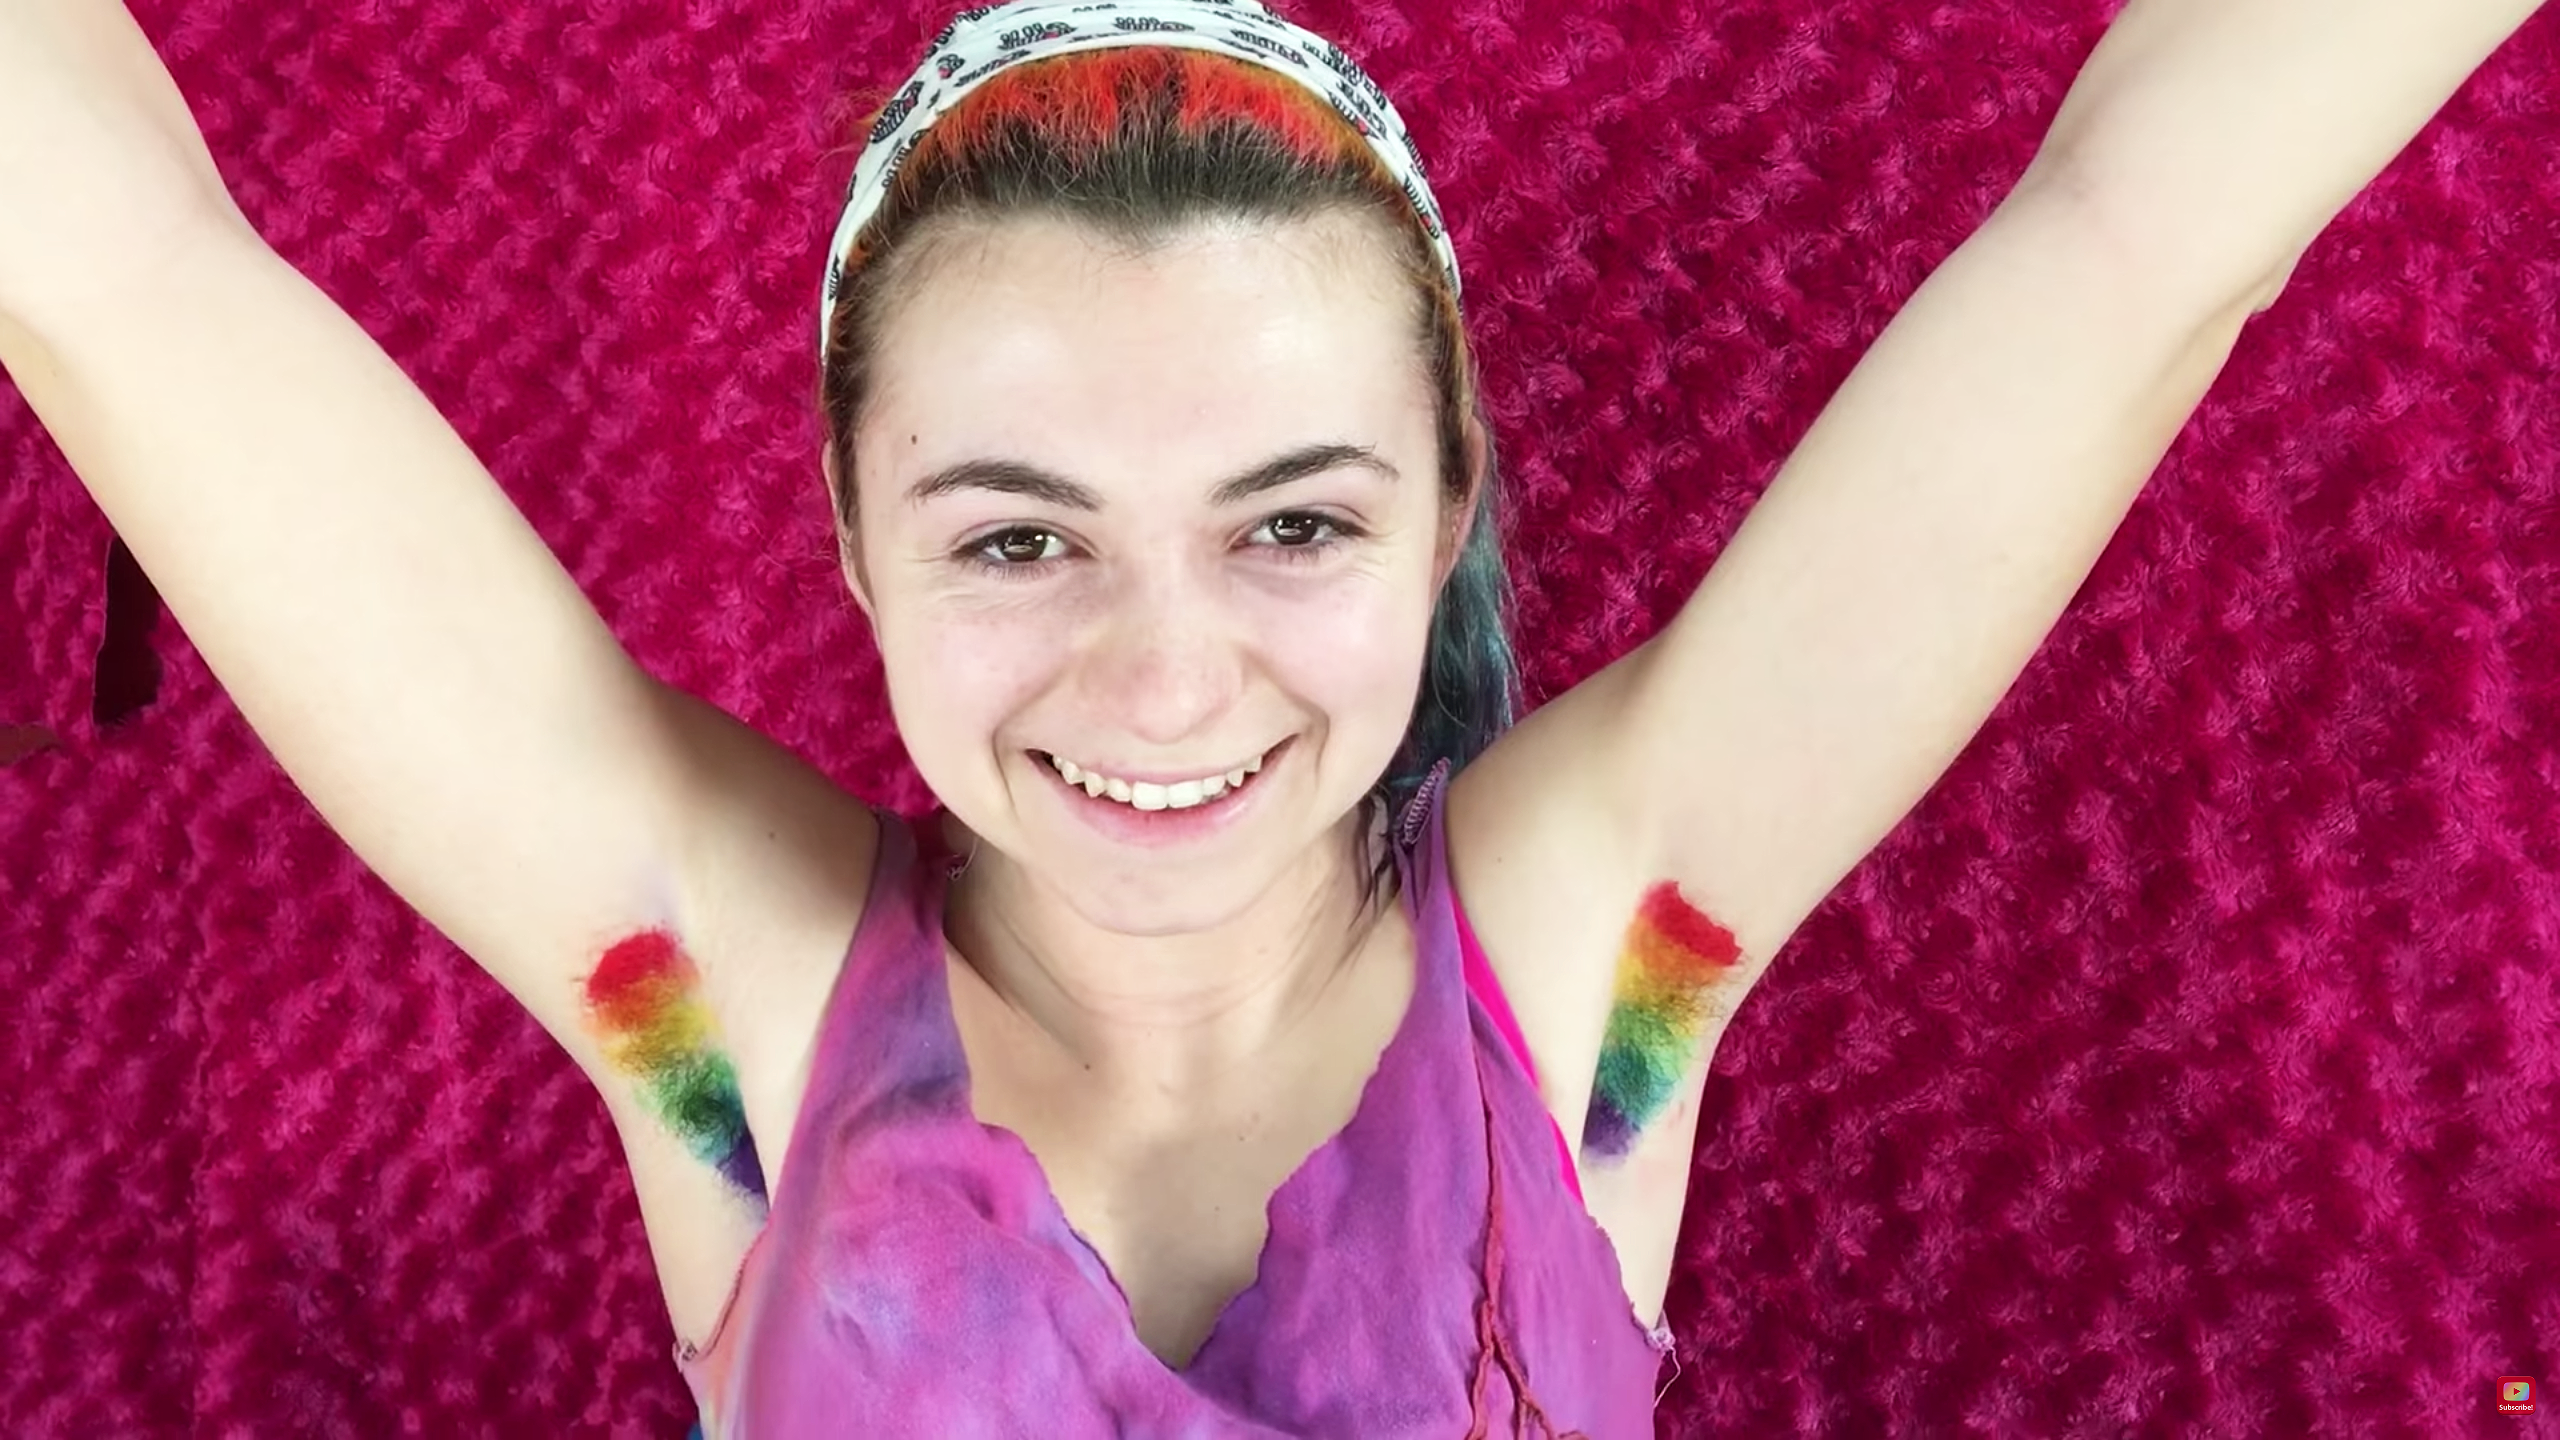 These Unicorn Armpit Hair Photos Prove This Is the Best ...